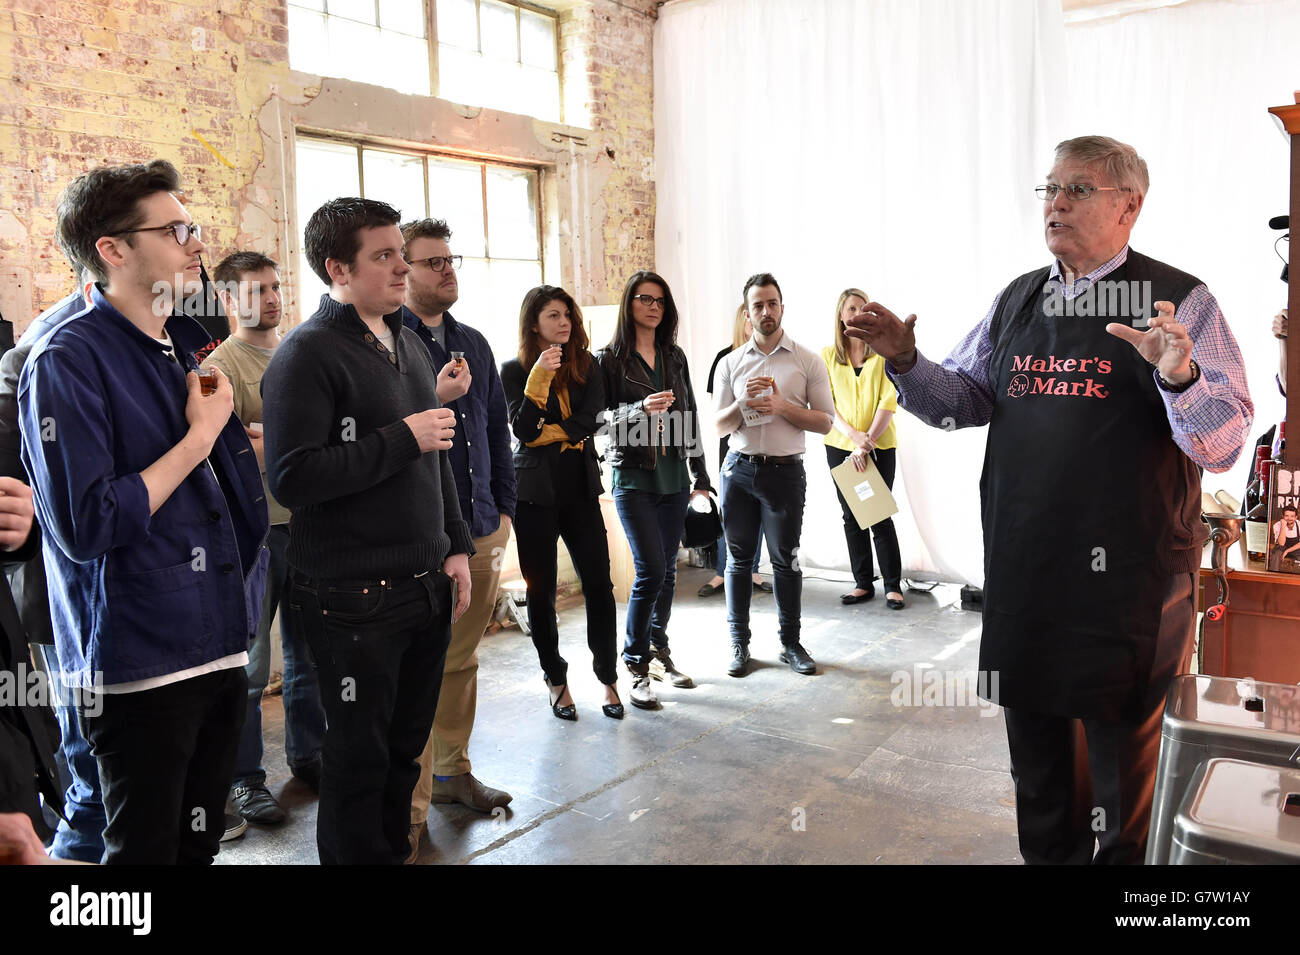 Former Maker's Mark president Bill Samuels Junior talks to visitors about the rising popularity of bourbon in the UK during a visit to the Jim Beam Crafthouse in London, which has opened to mark the rise in popularity of bourbon in the UK. Stock Photo